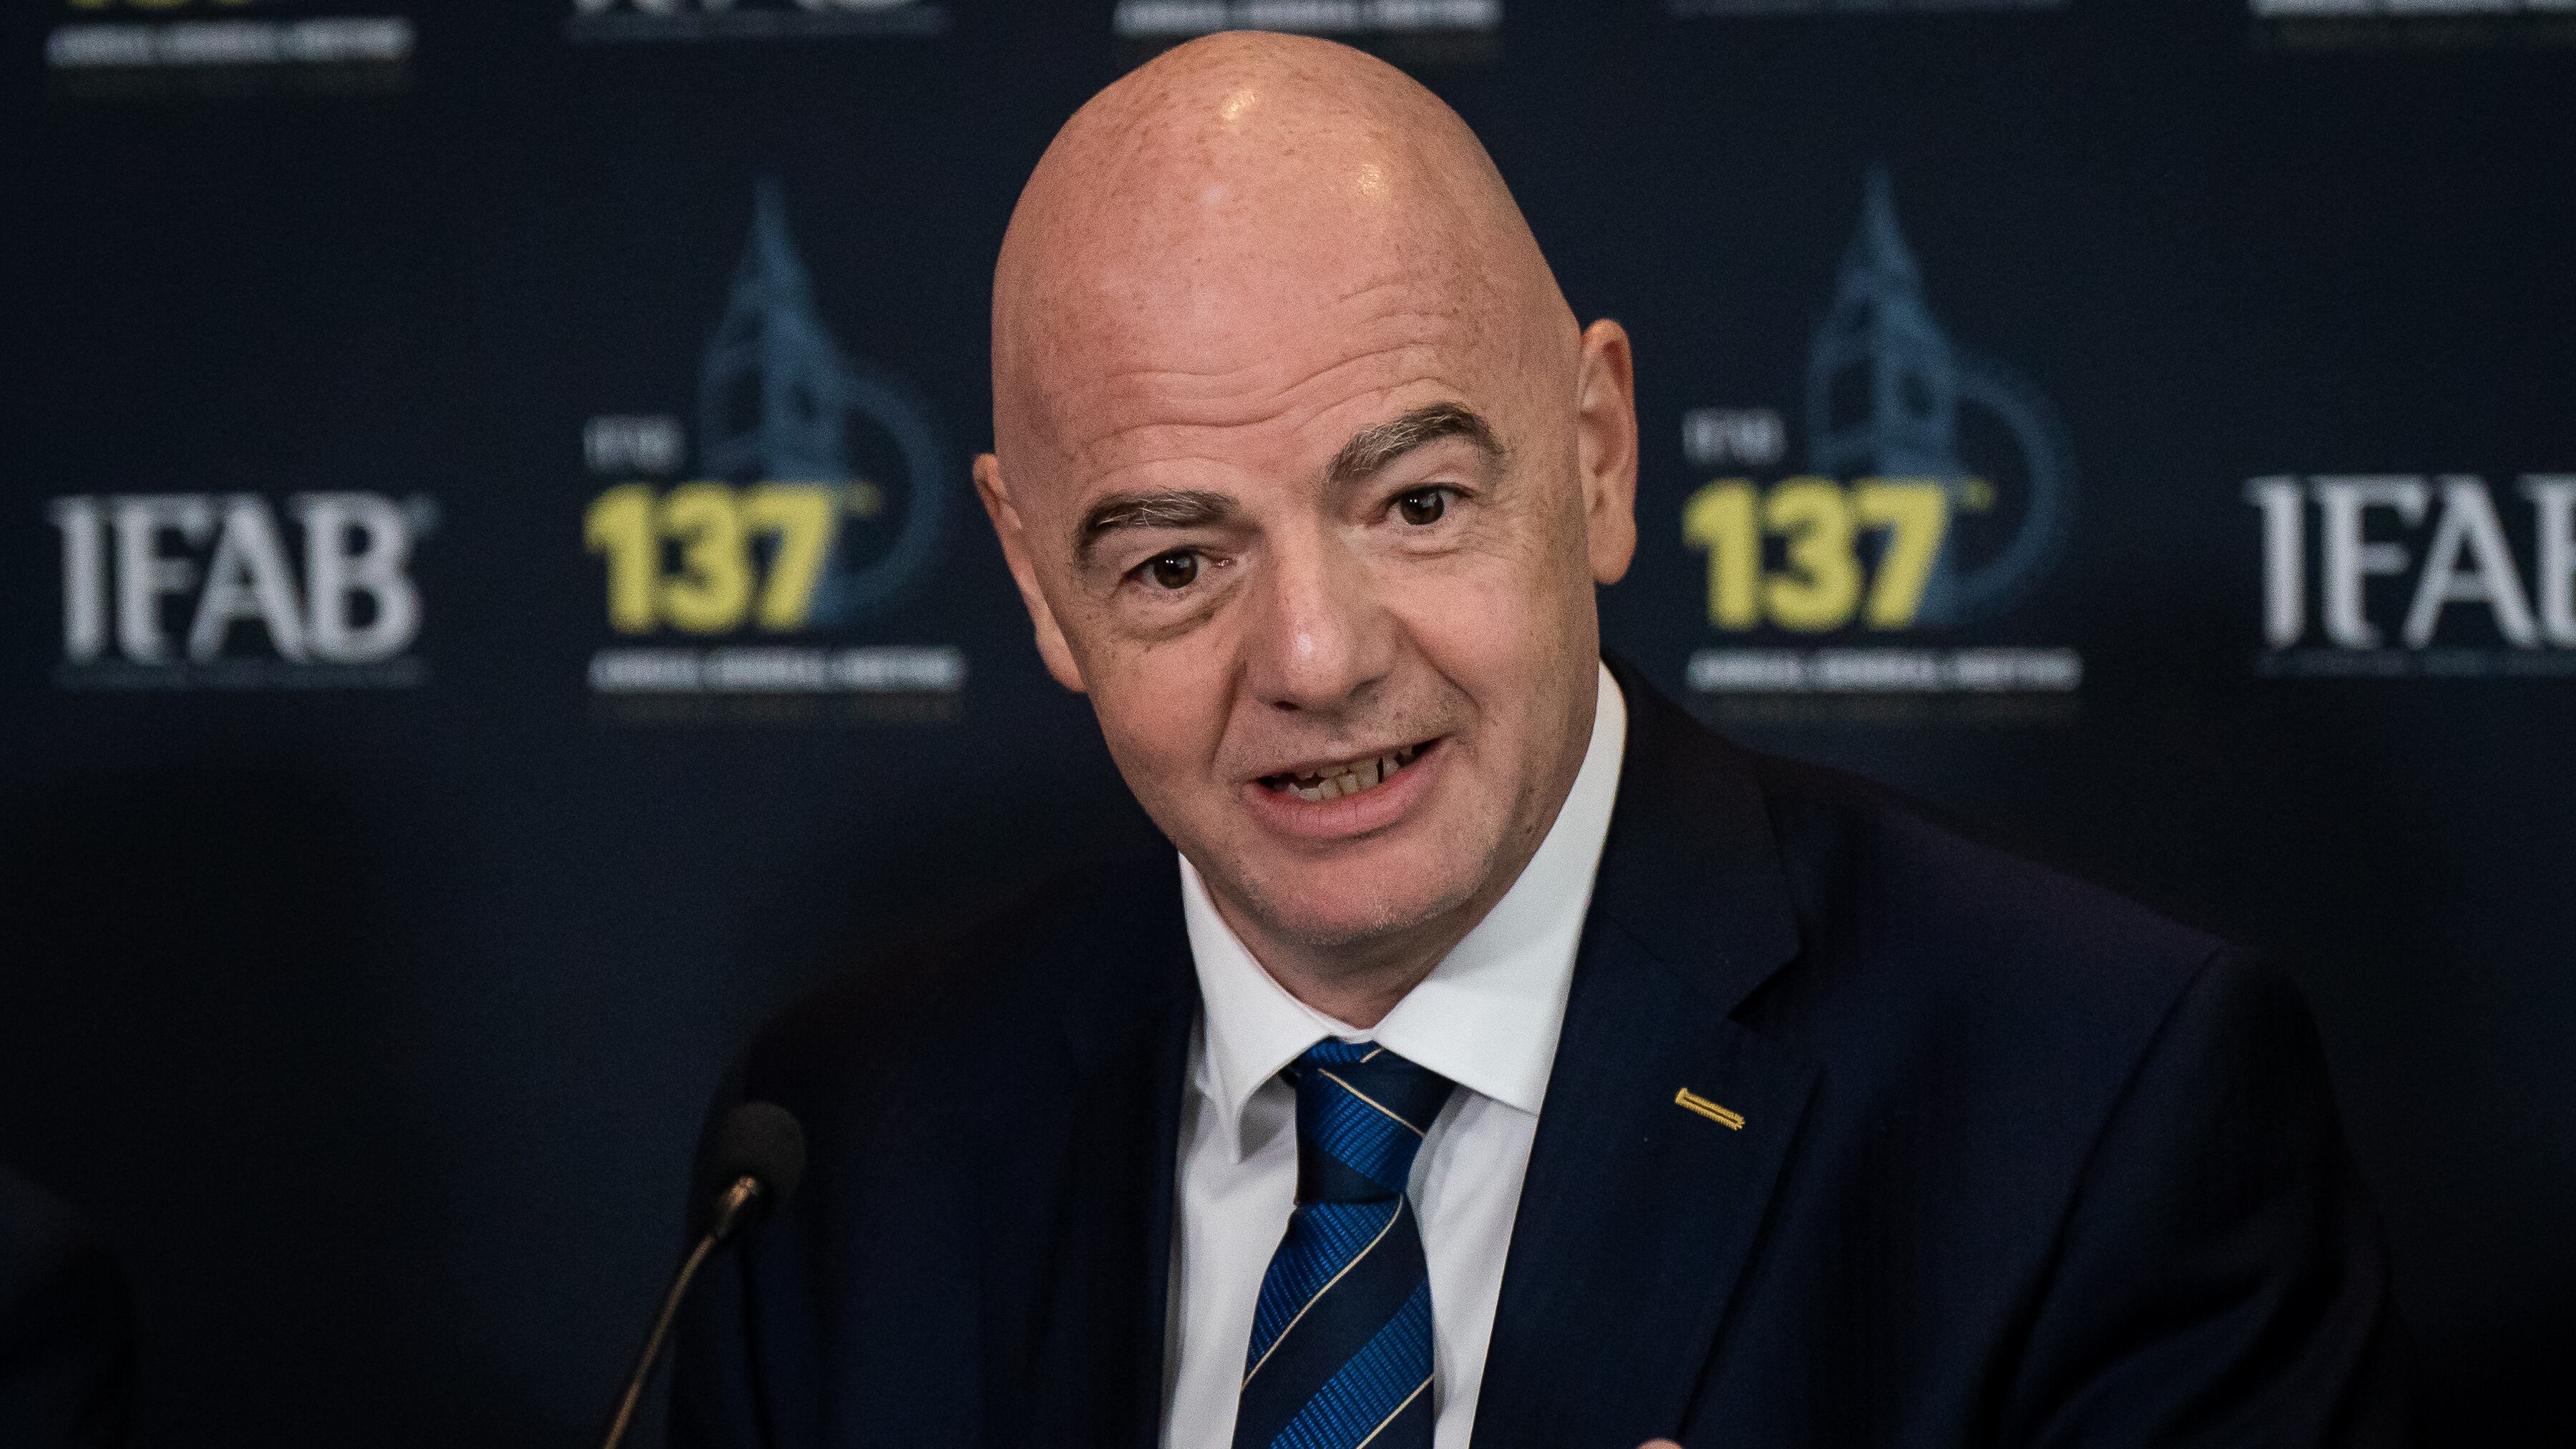 FIFA, led by its president Gianni Infantino, is the subject of a legal challenge over its scheduling of next year’s Club World Cup